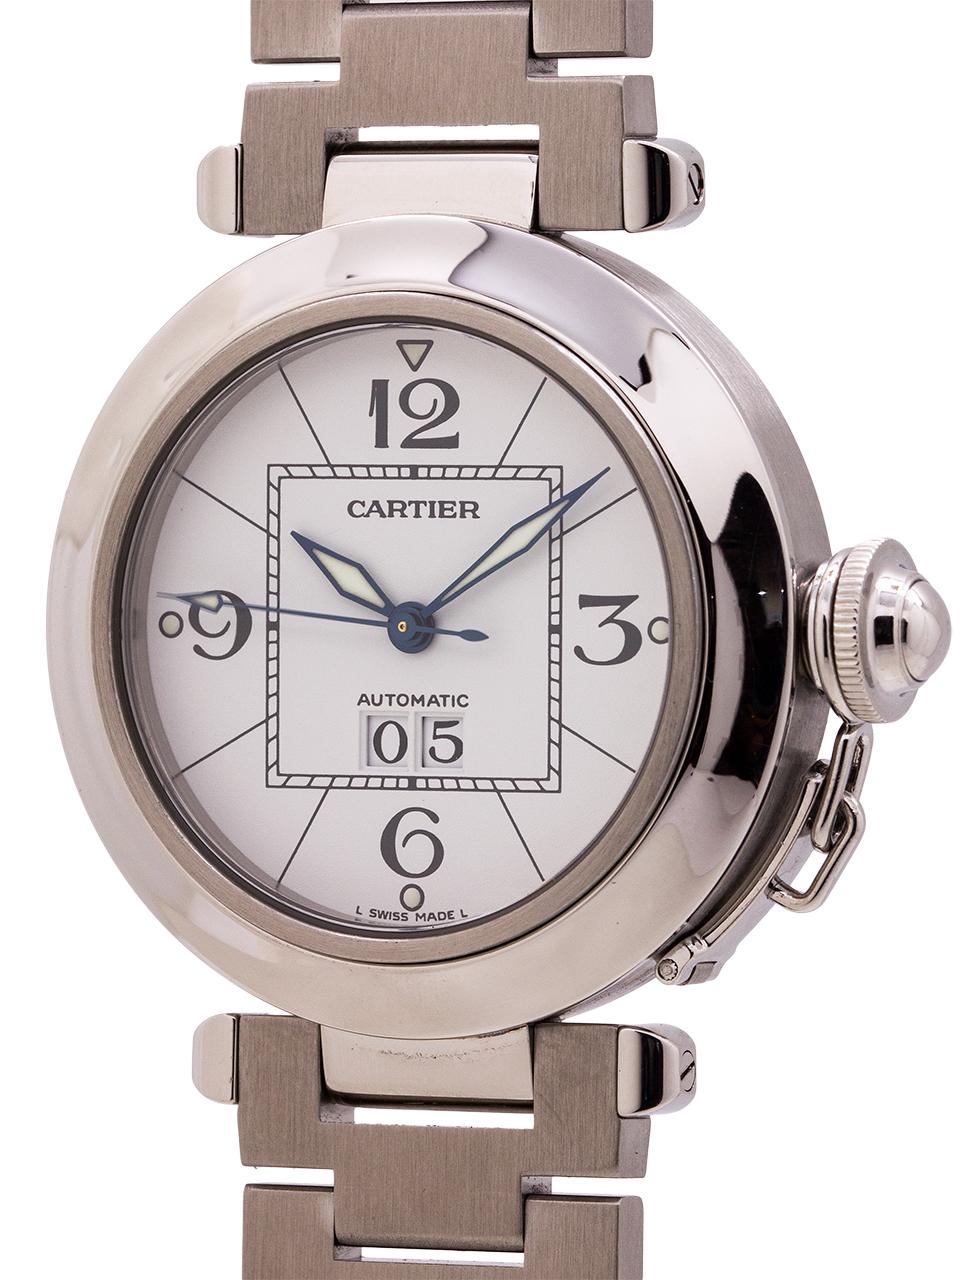 Cartier Pasha C “Big Date” Stainless Steel Automatic Watch, circa 2000s In Excellent Condition For Sale In West Hollywood, CA